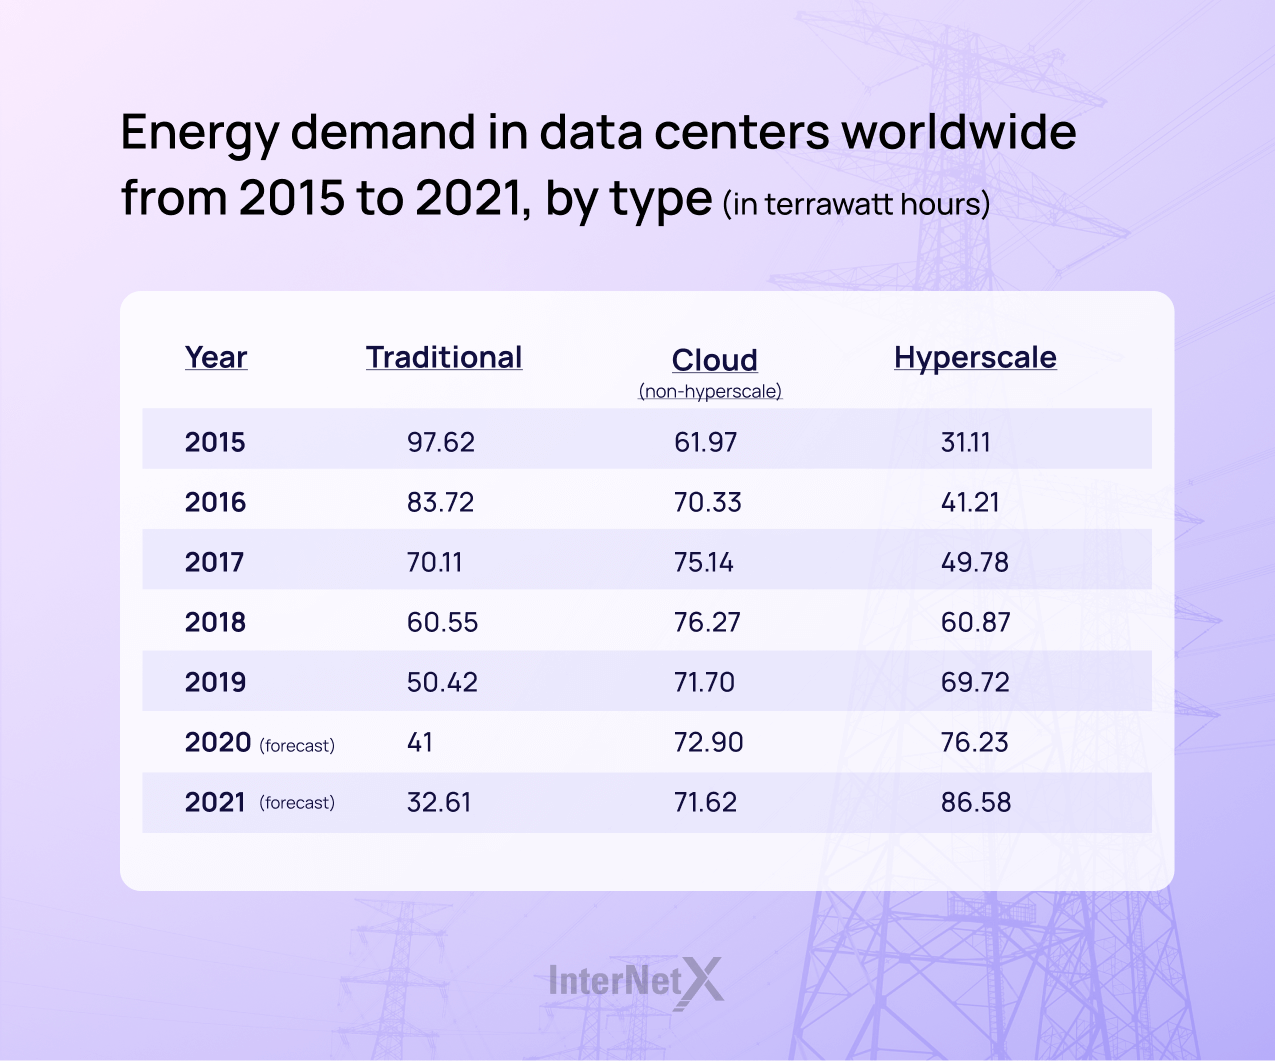 The image shows the energy demand in data centers worldwide (2015-2021) by type in terawattstunden.